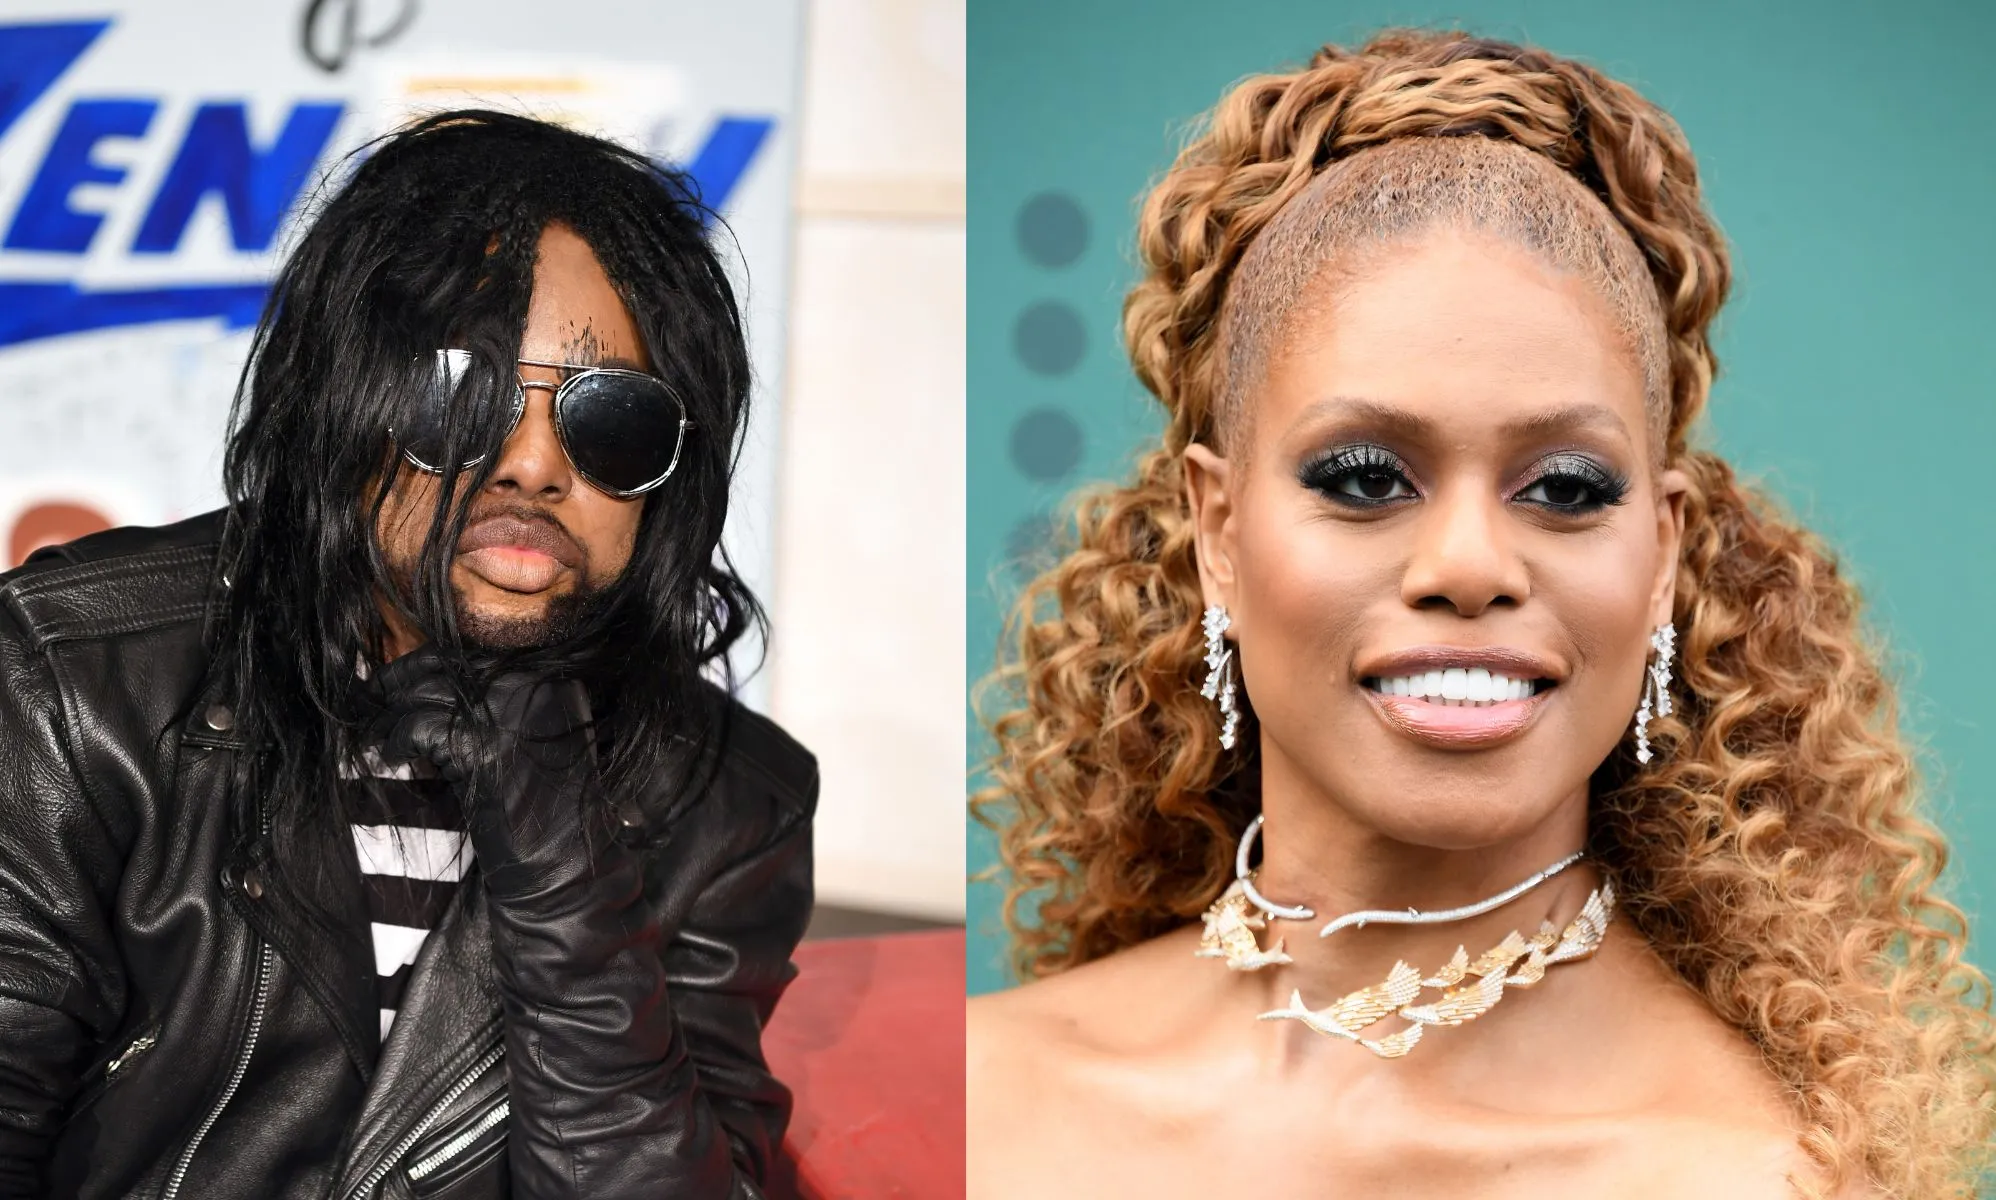 All about Laverne Cox's twin brother M Lamar, a fierce trans ally